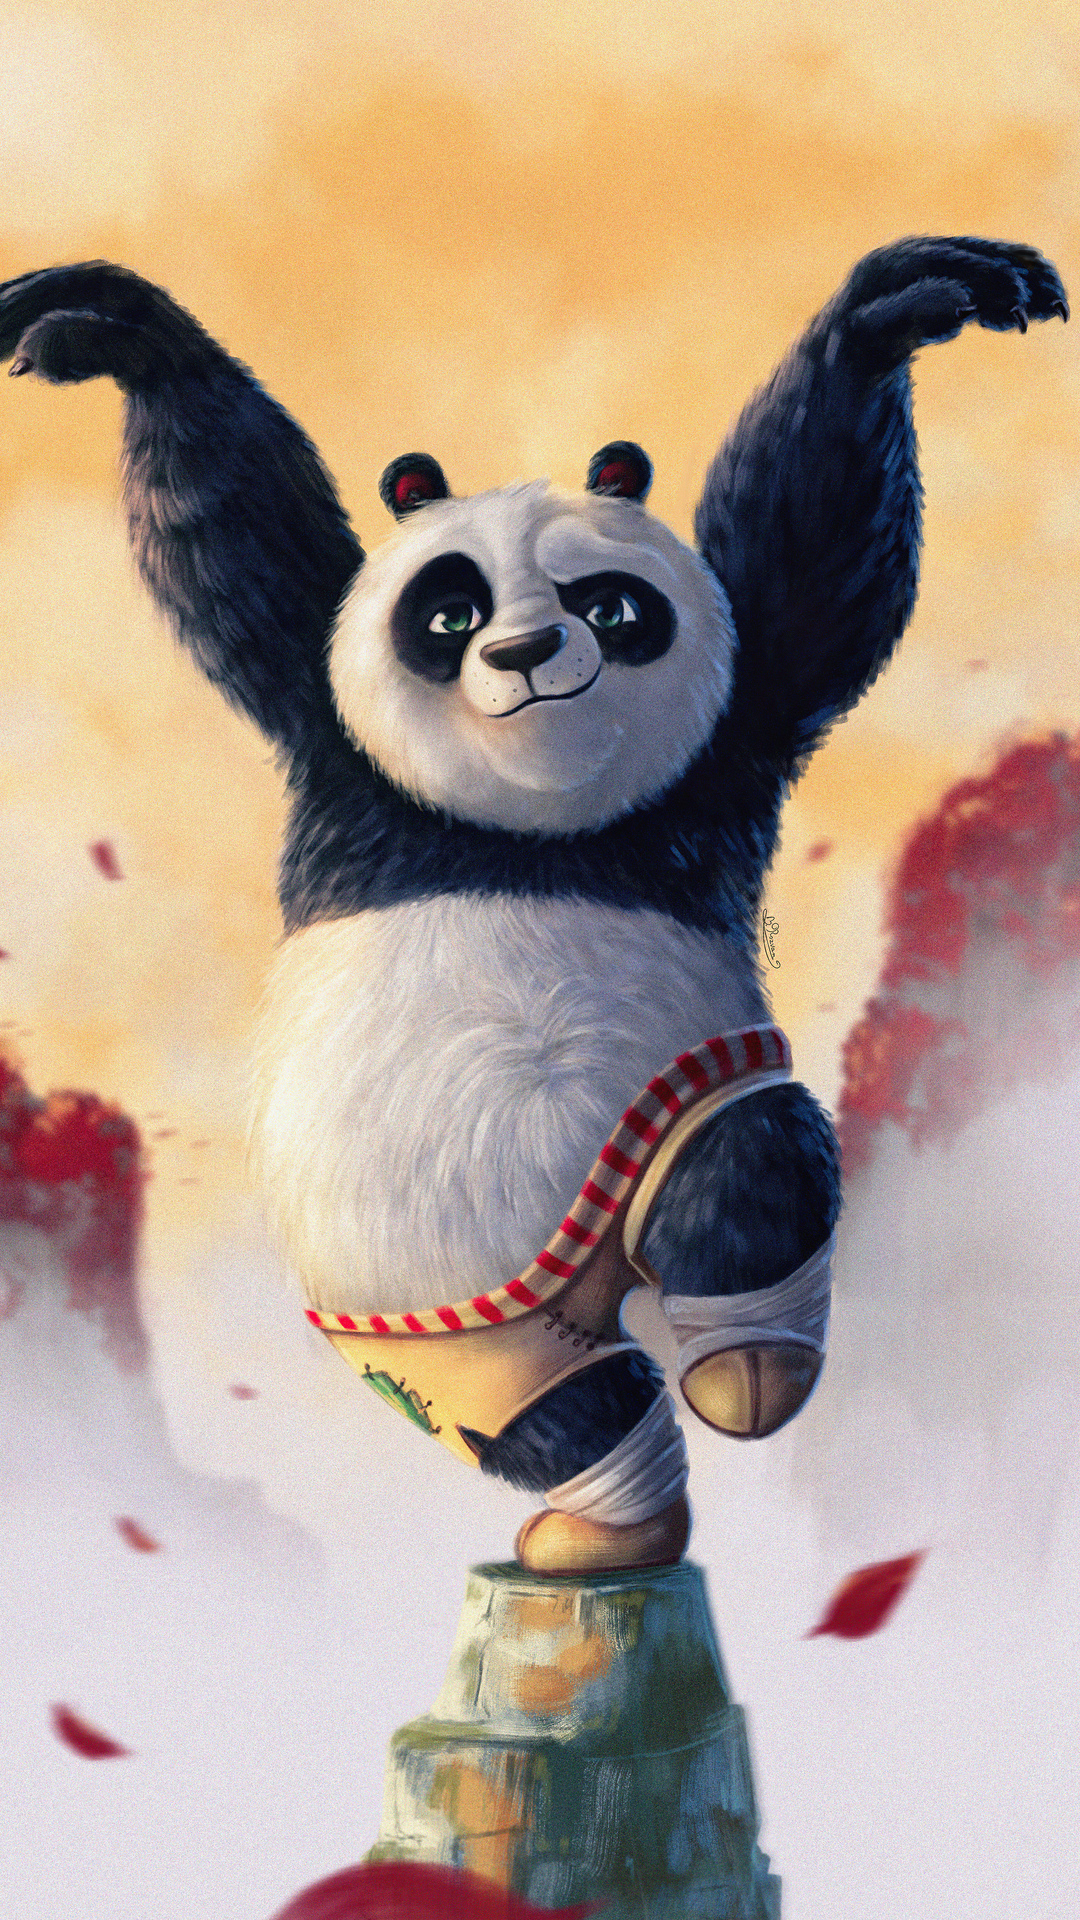 Po From Kung Fu Panda iPhone 6s, 6 Plus, Pixel xl , One Plus 3t, 5 HD 4k Wallpaper, Image, Background, Photo and Picture